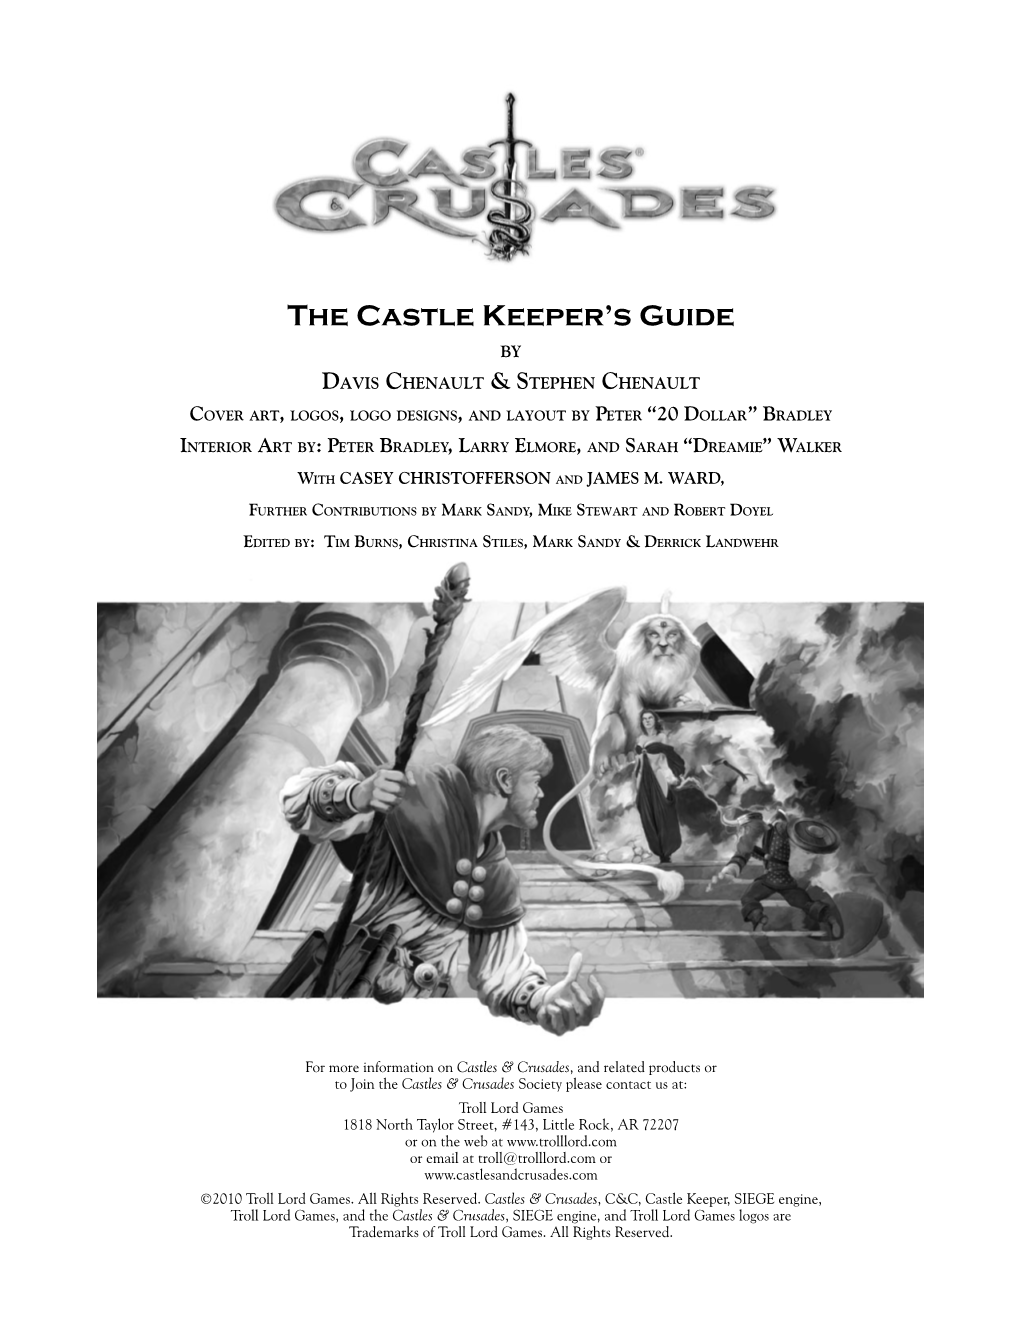 The Castle Keeper's Guide